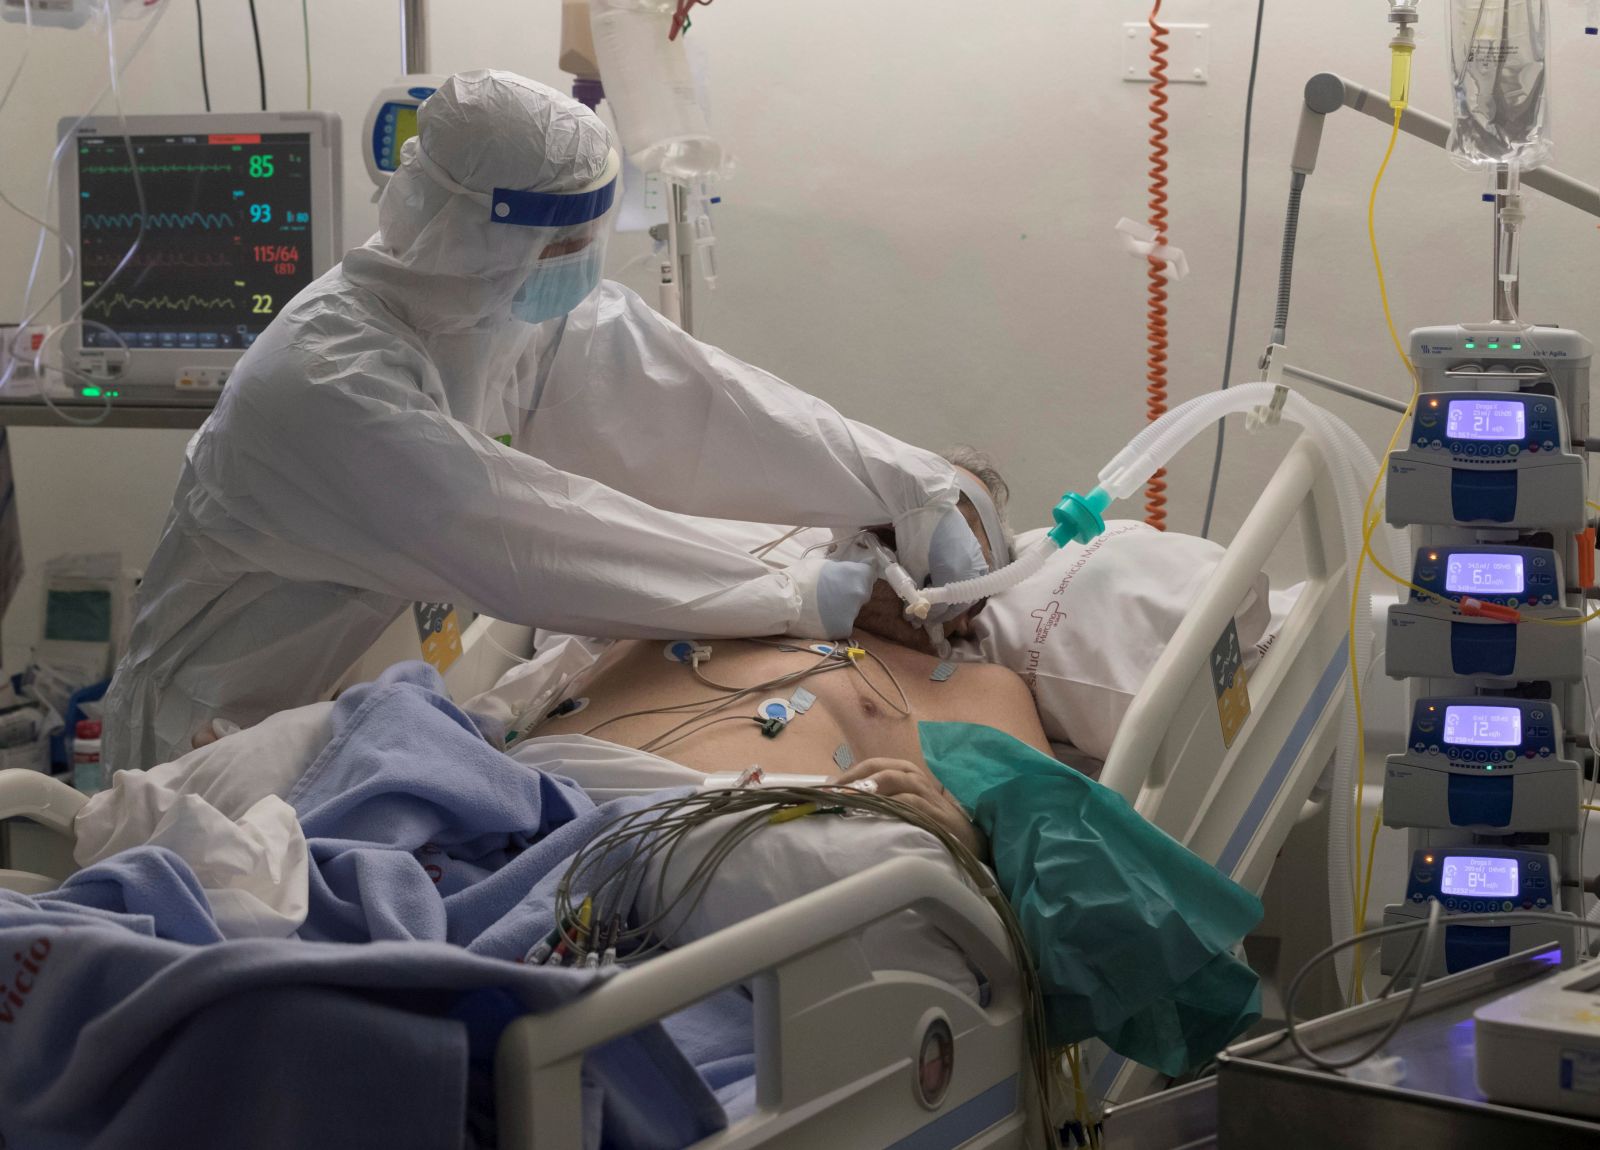 epa08972752 A nurse from the Intensive Care Unit (ICU) of the Morales Meseguer Hospital changes the respirator of a patient admitted for COVID-19, in the coastal city of Murcia in eastern Spain, 29 January 2021. Anxiety, depression, post-traumatic stress disorder, insomnia or cognitive impairment are some of the sequelae that COVID-19 leaves behind in a very significant percentage of patients who have overcome the disease, despite the fact that there is little scientific literature on these consequences because the first two waves of the pandemic focused mainly on studying damage to the pulmonary system.  EPA/Marcial Guillen